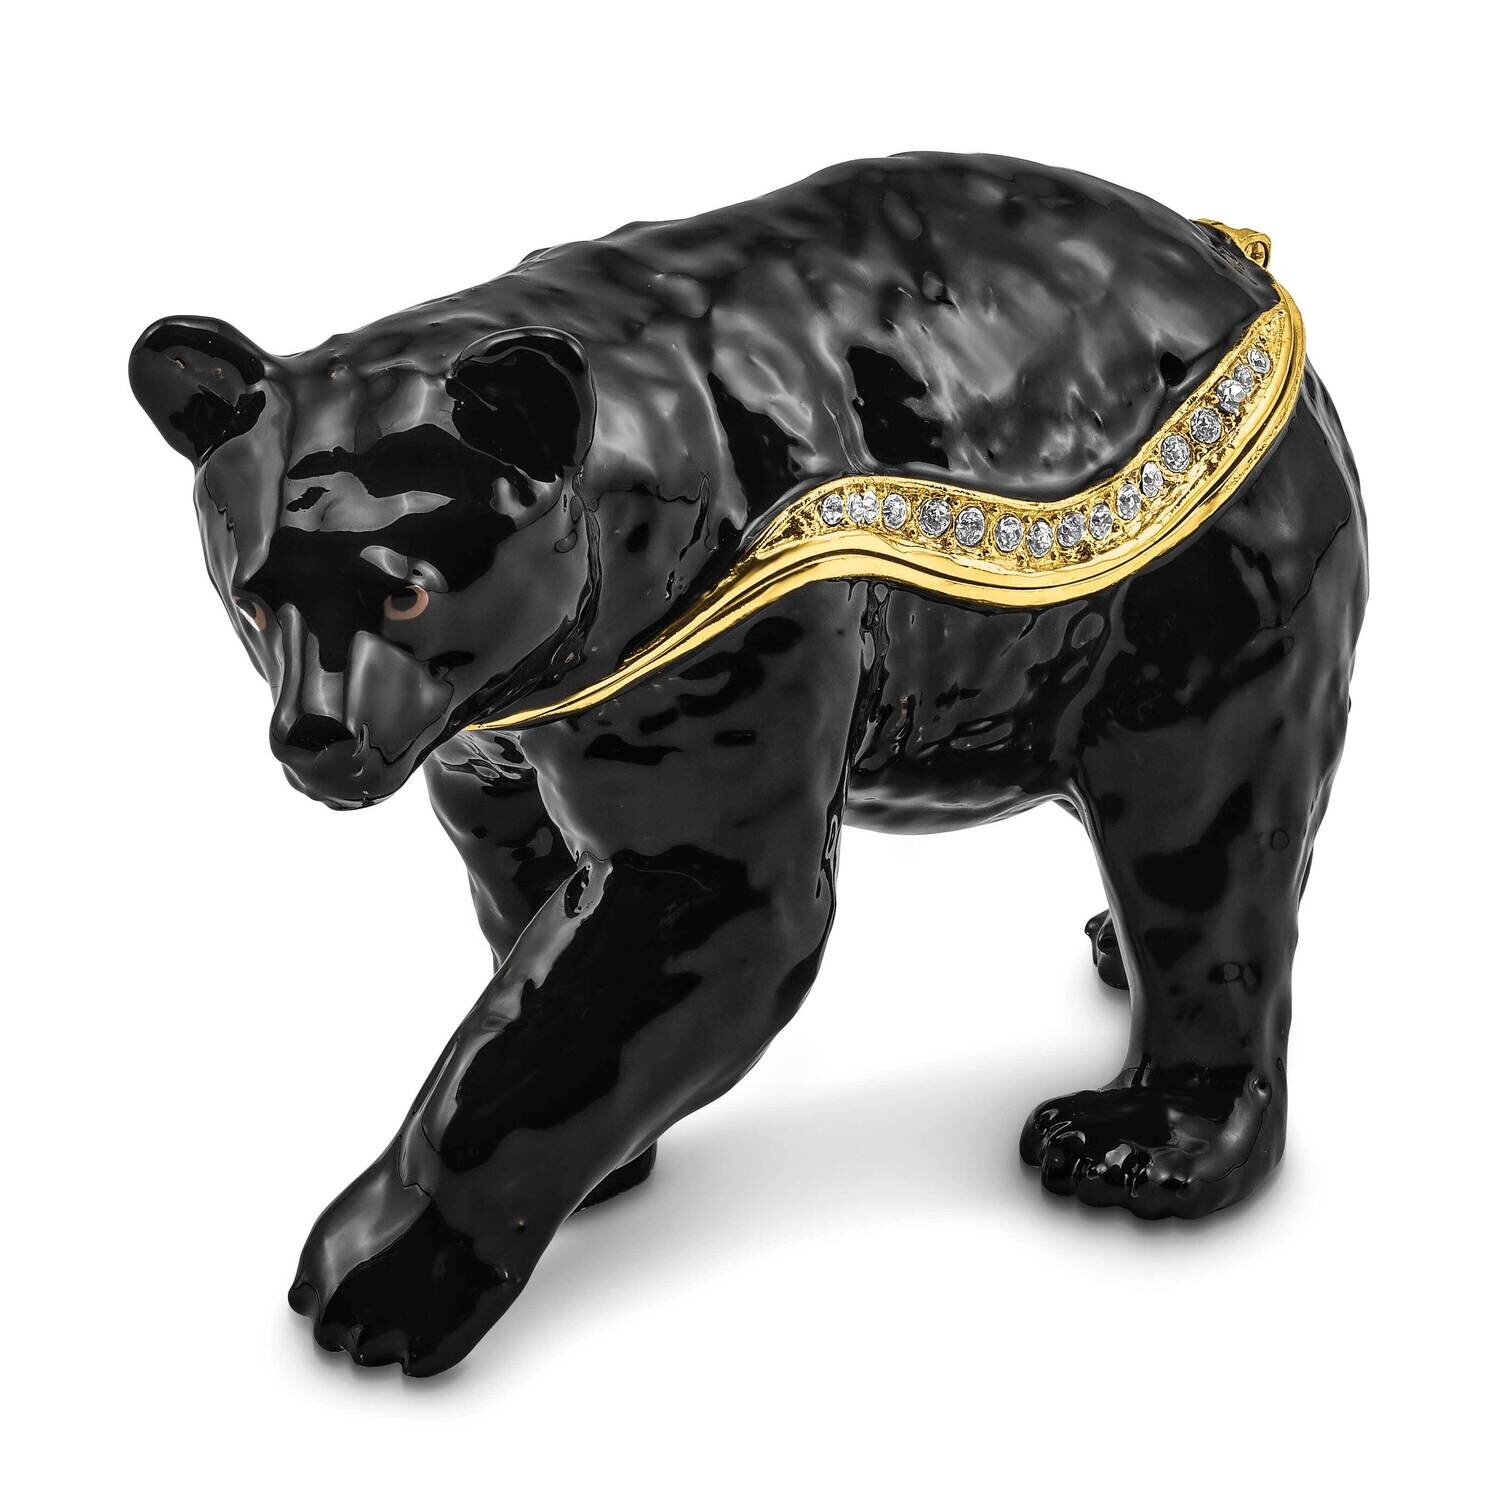 By Jere SMOKEY Walking Black Bear Trinket Box with Matching 18 Inch Necklace Pewter Bejeweled Crystals Gold-tone Enameled BJ4104